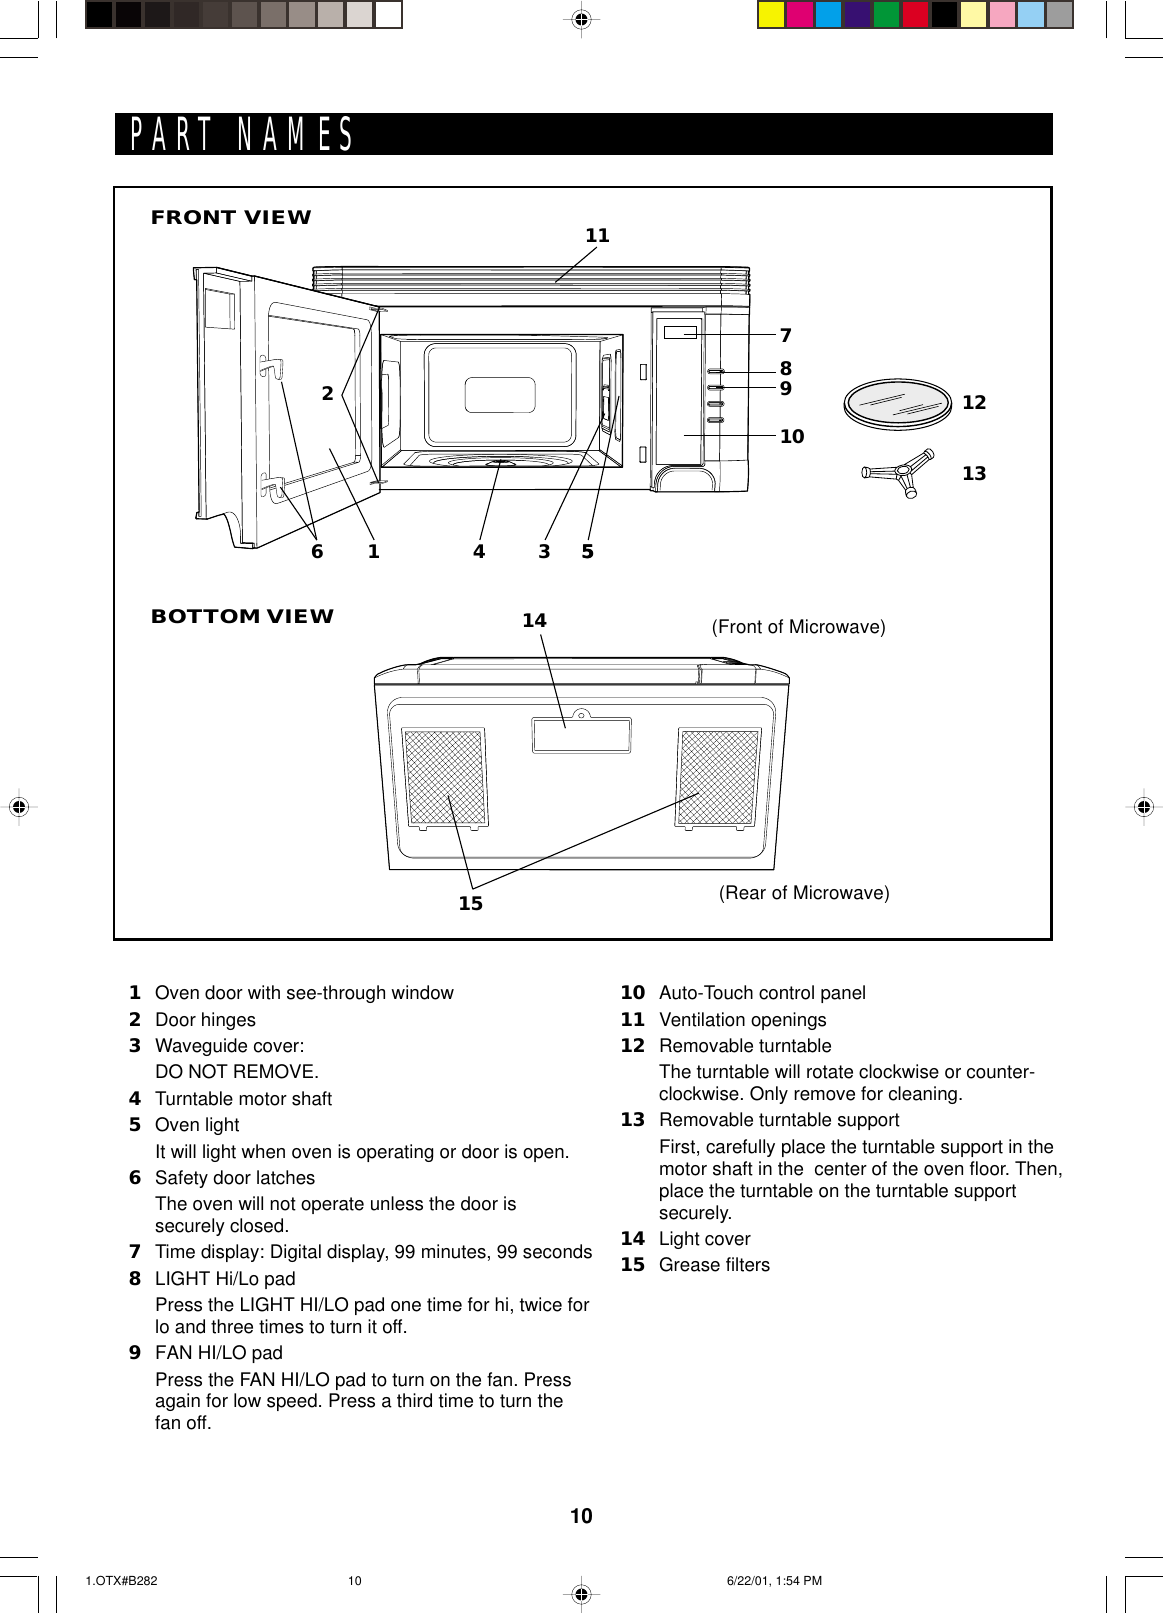 10PART NAMES1Oven door with see-through window2Door hinges3Waveguide cover:DO NOT REMOVE.4Turntable motor shaft5Oven lightIt will light when oven is operating or door is open.6Safety door latchesThe oven will not operate unless the door issecurely closed.7Time display: Digital display, 99 minutes, 99 seconds8LIGHT Hi/Lo padPress the LIGHT HI/LO pad one time for hi, twice forlo and three times to turn it off.9FAN HI/LO padPress the FAN HI/LO pad to turn on the fan. Pressagain for low speed. Press a third time to turn thefan off.10 Auto-Touch control panel11 Ventilation openings12 Removable turntableThe turntable will rotate clockwise or counter-clockwise. Only remove for cleaning.13 Removable turntable supportFirst, carefully place the turntable support in themotor shaft in the  center of the oven floor. Then,place the turntable on the turntable supportsecurely.14 Light cover15 Grease filtersBOTTOM VIEW(Front of Microwave)(Rear of Microwave)FRONT VIEW141516234 55789101112131.OTX#B282 6/22/01, 1:54 PM10